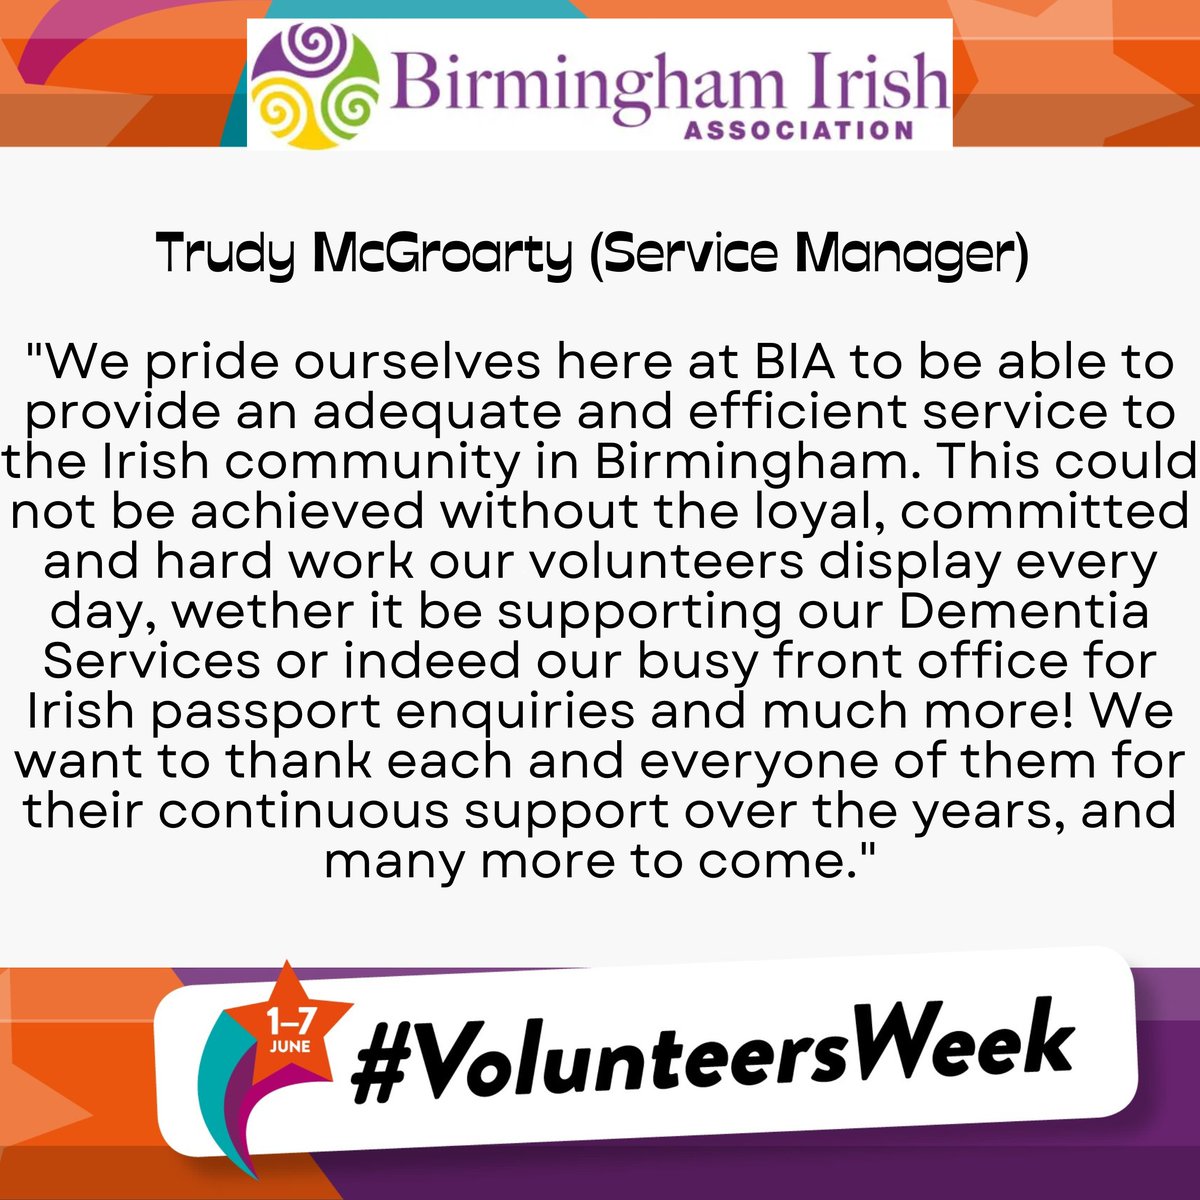 Here at BIA we have been celebrating all of our amazing volunteers for  #VolunteersWeek ✨

If you would like to join our team, for more information contact Roisin (Volunteer Co-Ordinator) via email roisin@birish.org.uk ✨💚

#BrumVolunteers